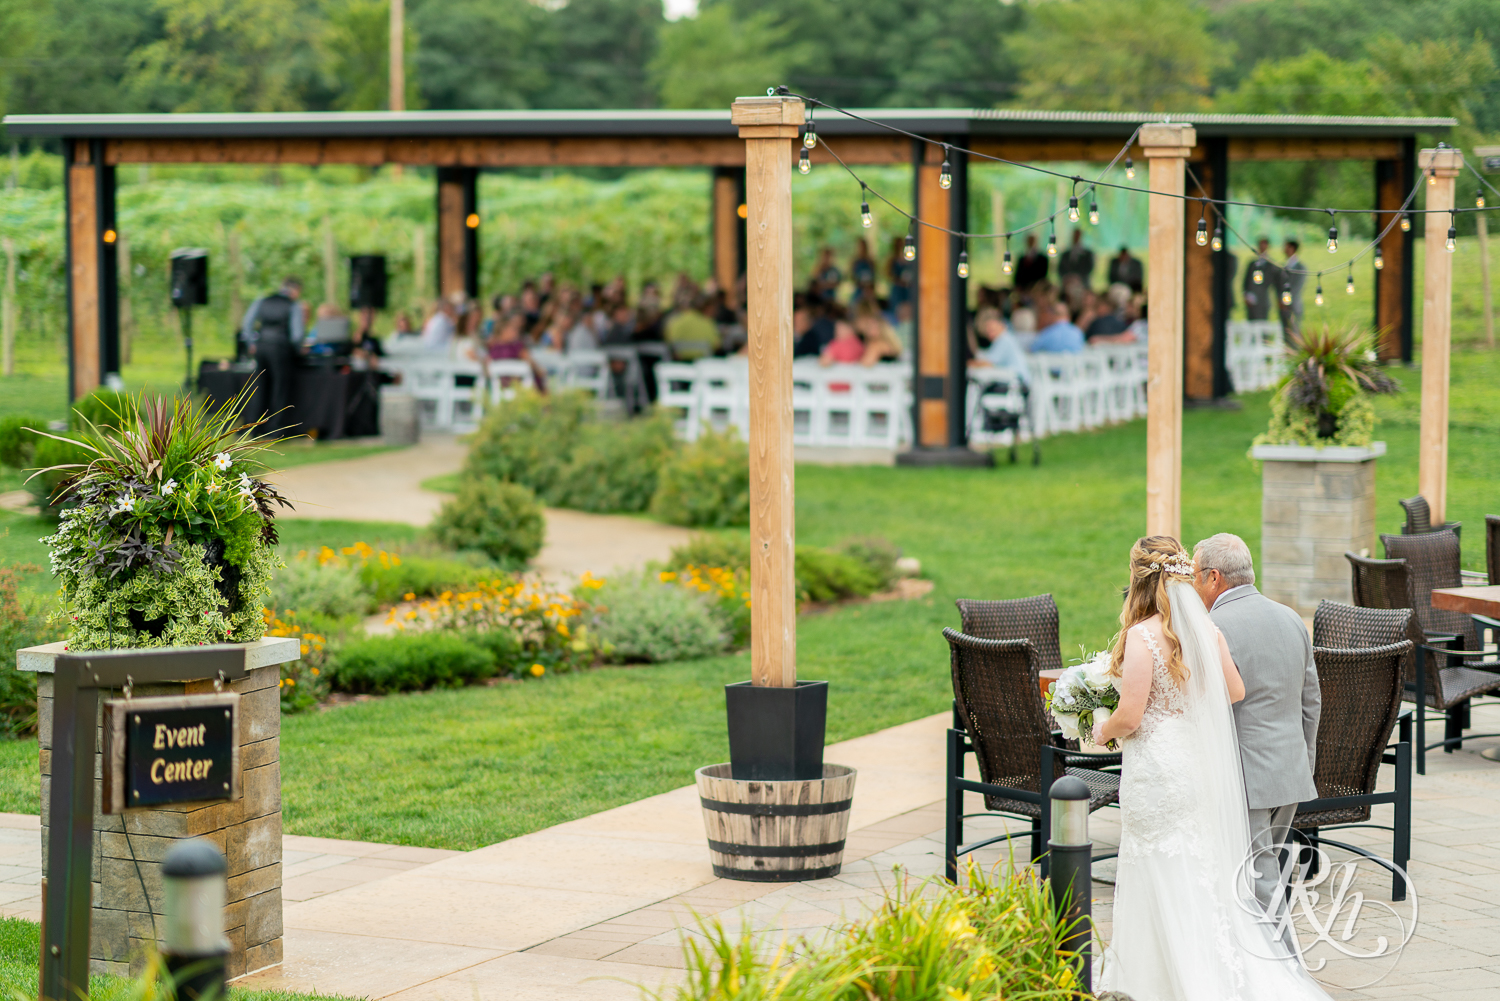 Bride walking down the aisle with her dad at 7 Vines Vineyard in Dellwood, Minnesota.